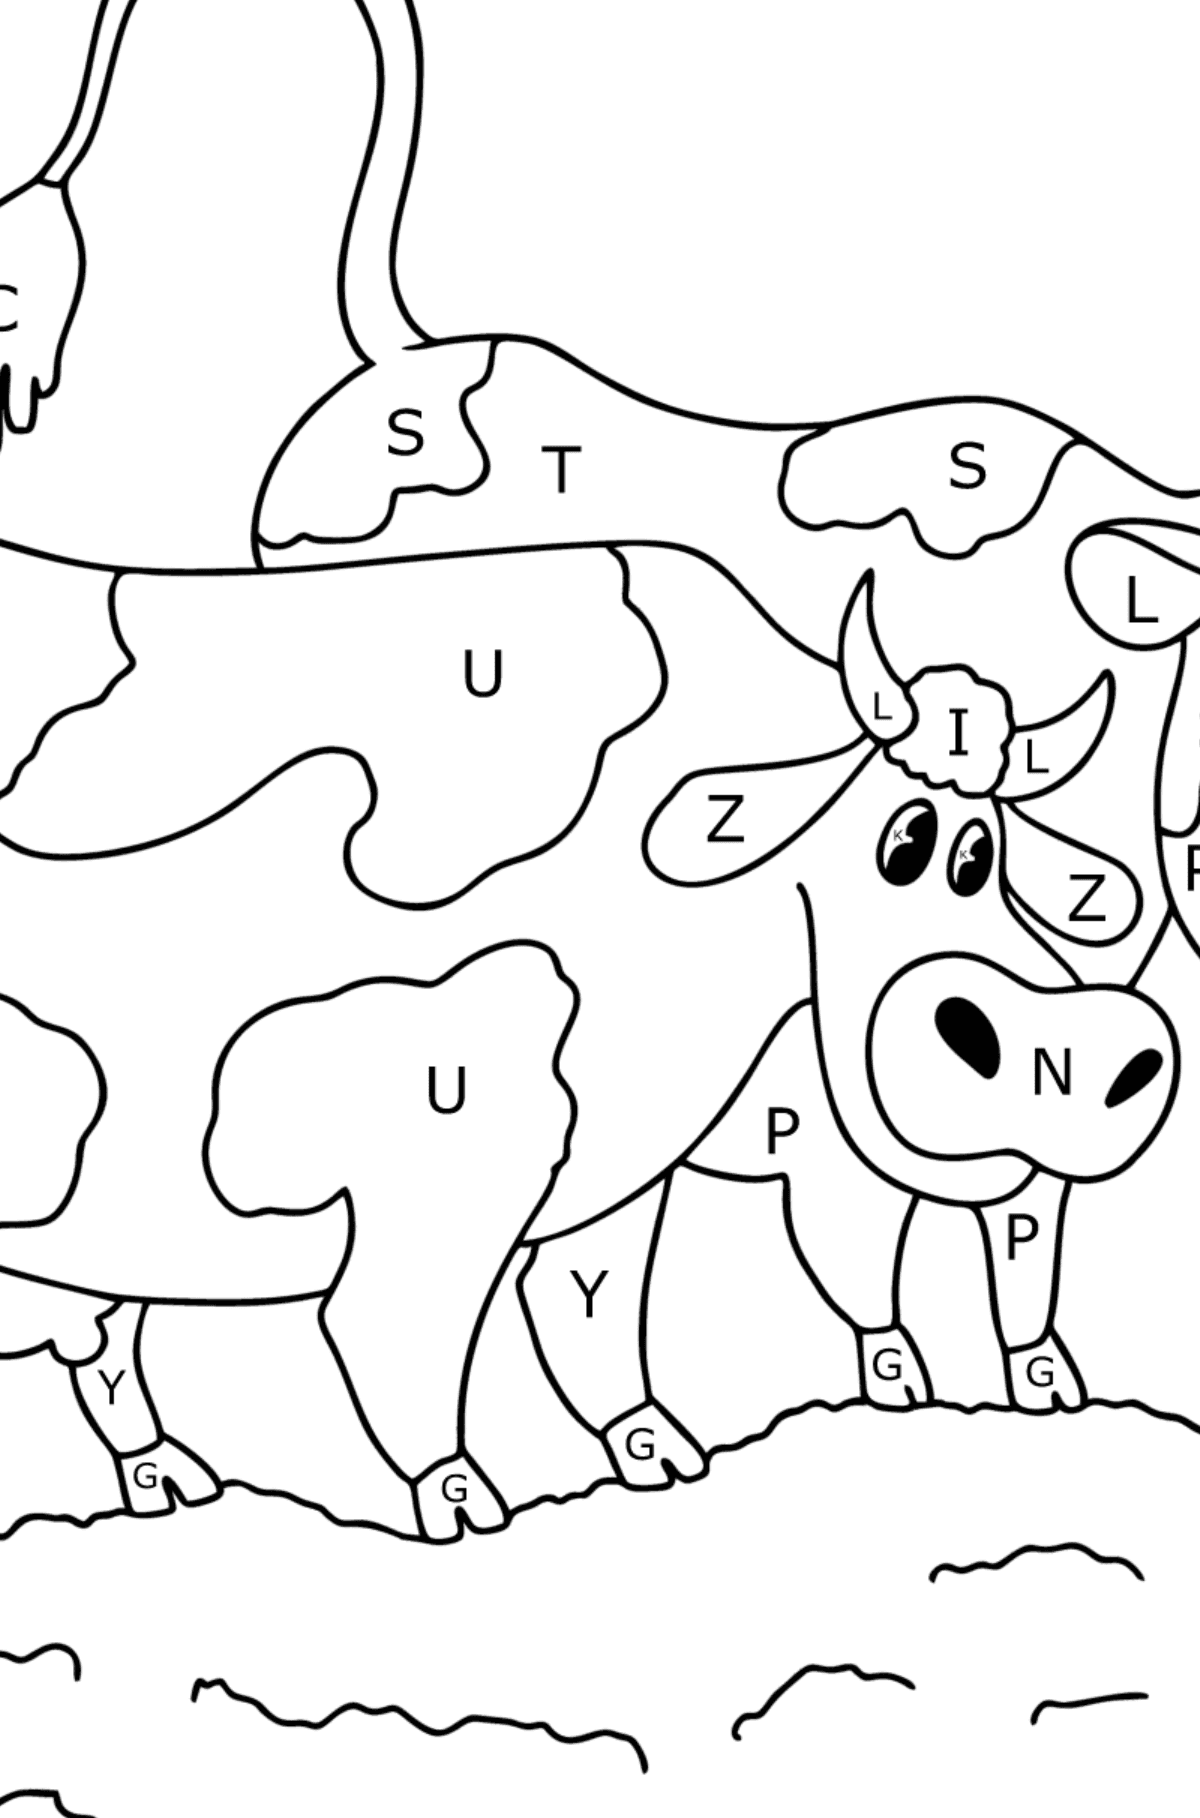 Two cows in the meadow Coloring page - Coloring by Letters for Kids